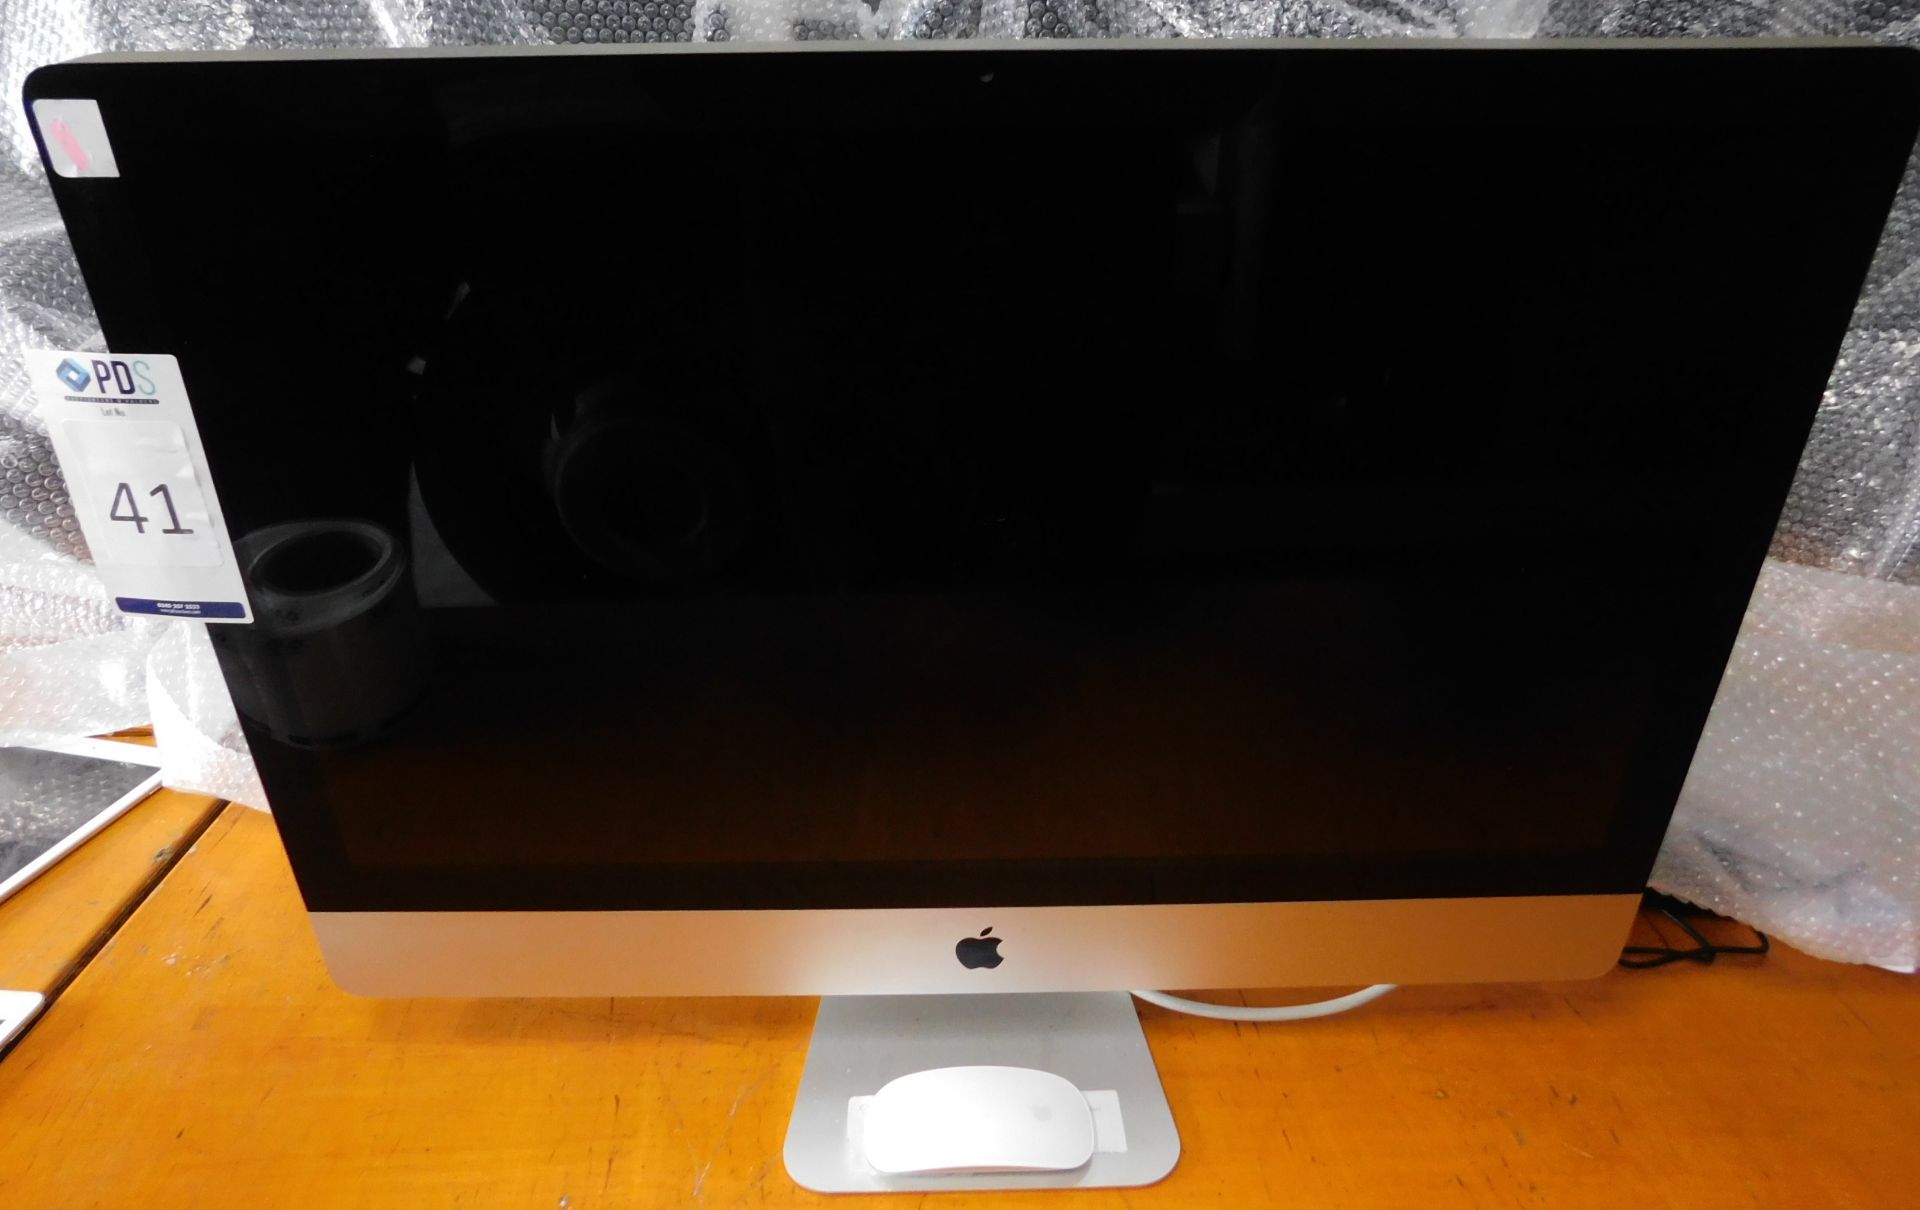 Apple iMac 27inch 2.7Ghz, Core i5, Model Number: A1312, Serial Number: C02FF6VRDHJP (Located